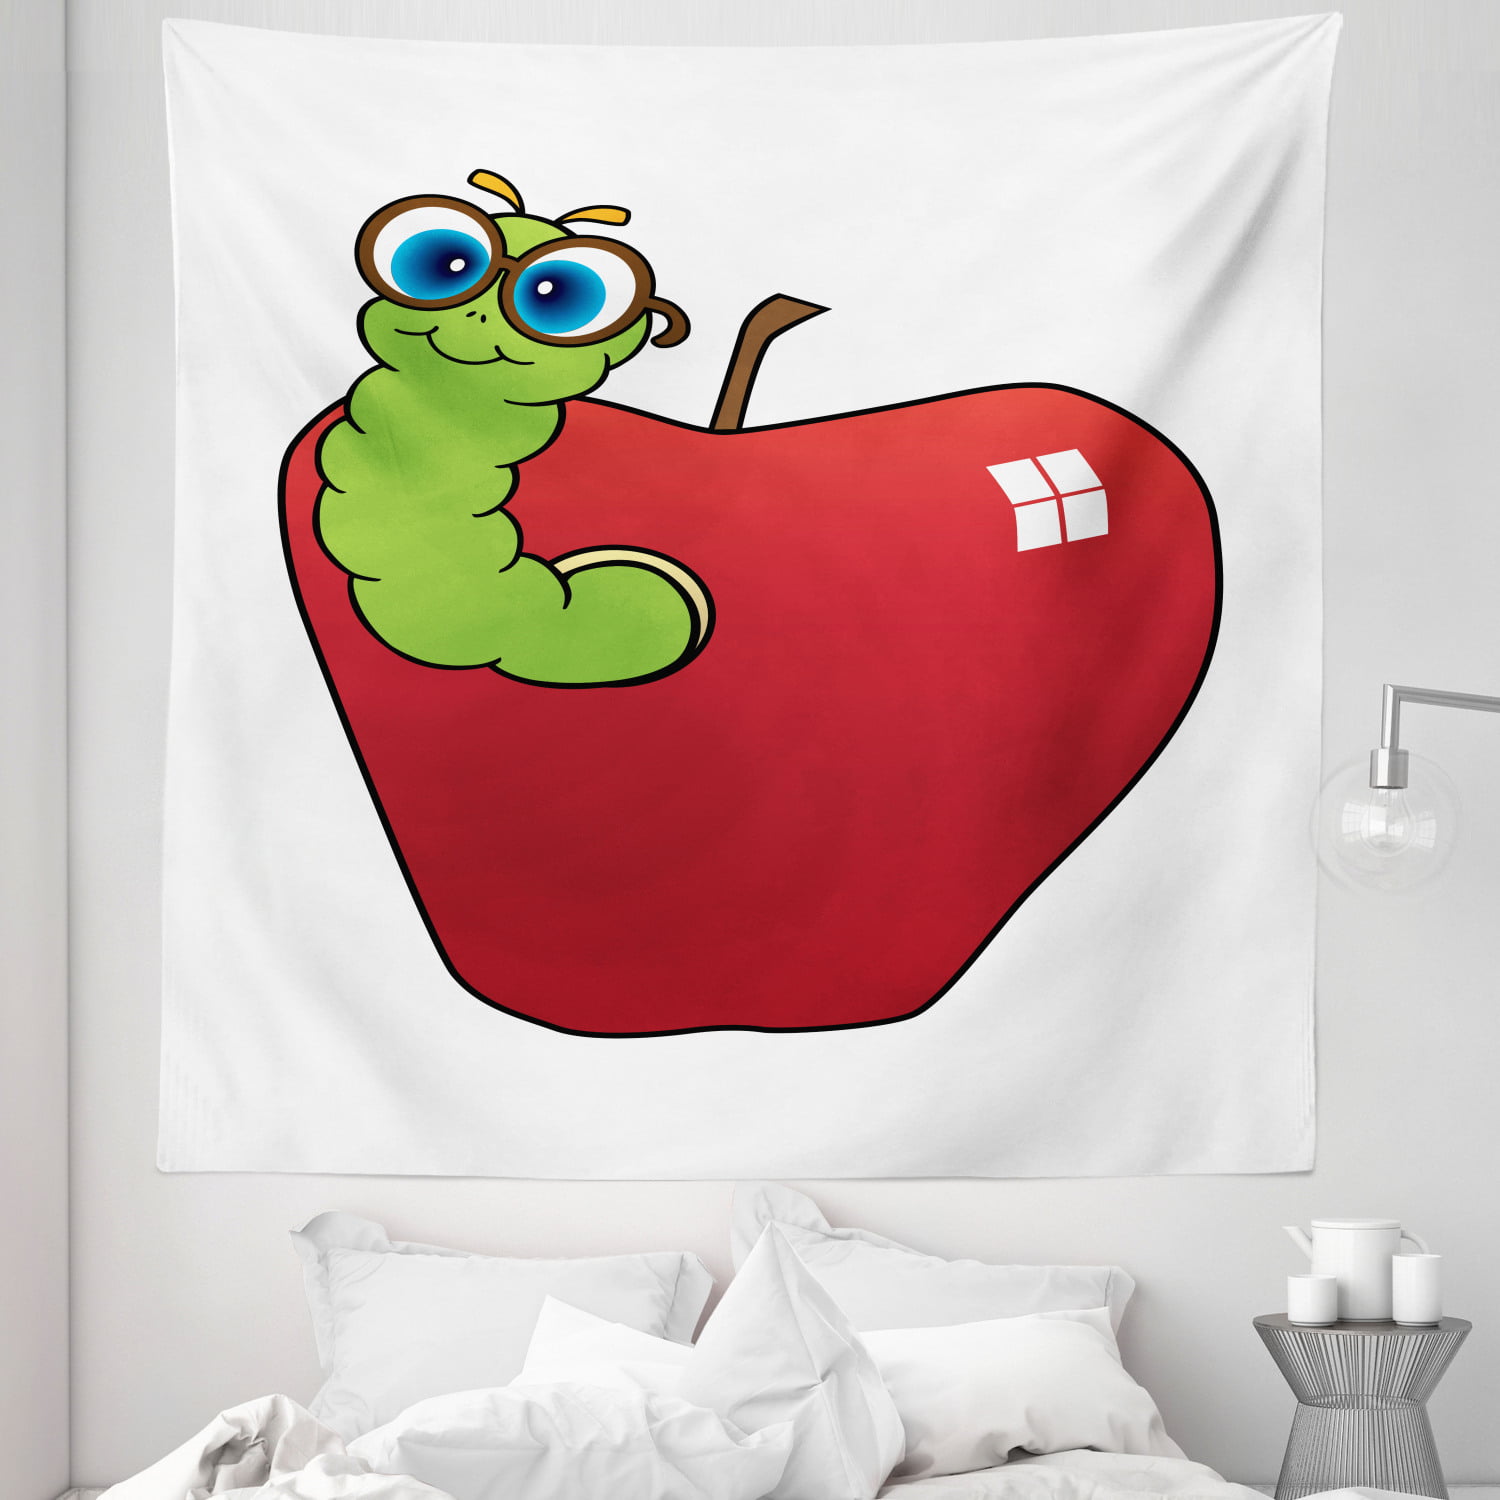 Nerd Tapestry, Funny Cartoon Intelligent Worm with Glasses Apple Colorful  Illustration, Fabric Wall Hanging Decor for Bedroom Living Room Dorm, 5  Sizes, Dark Pink and Lime Green, by Ambesonne 